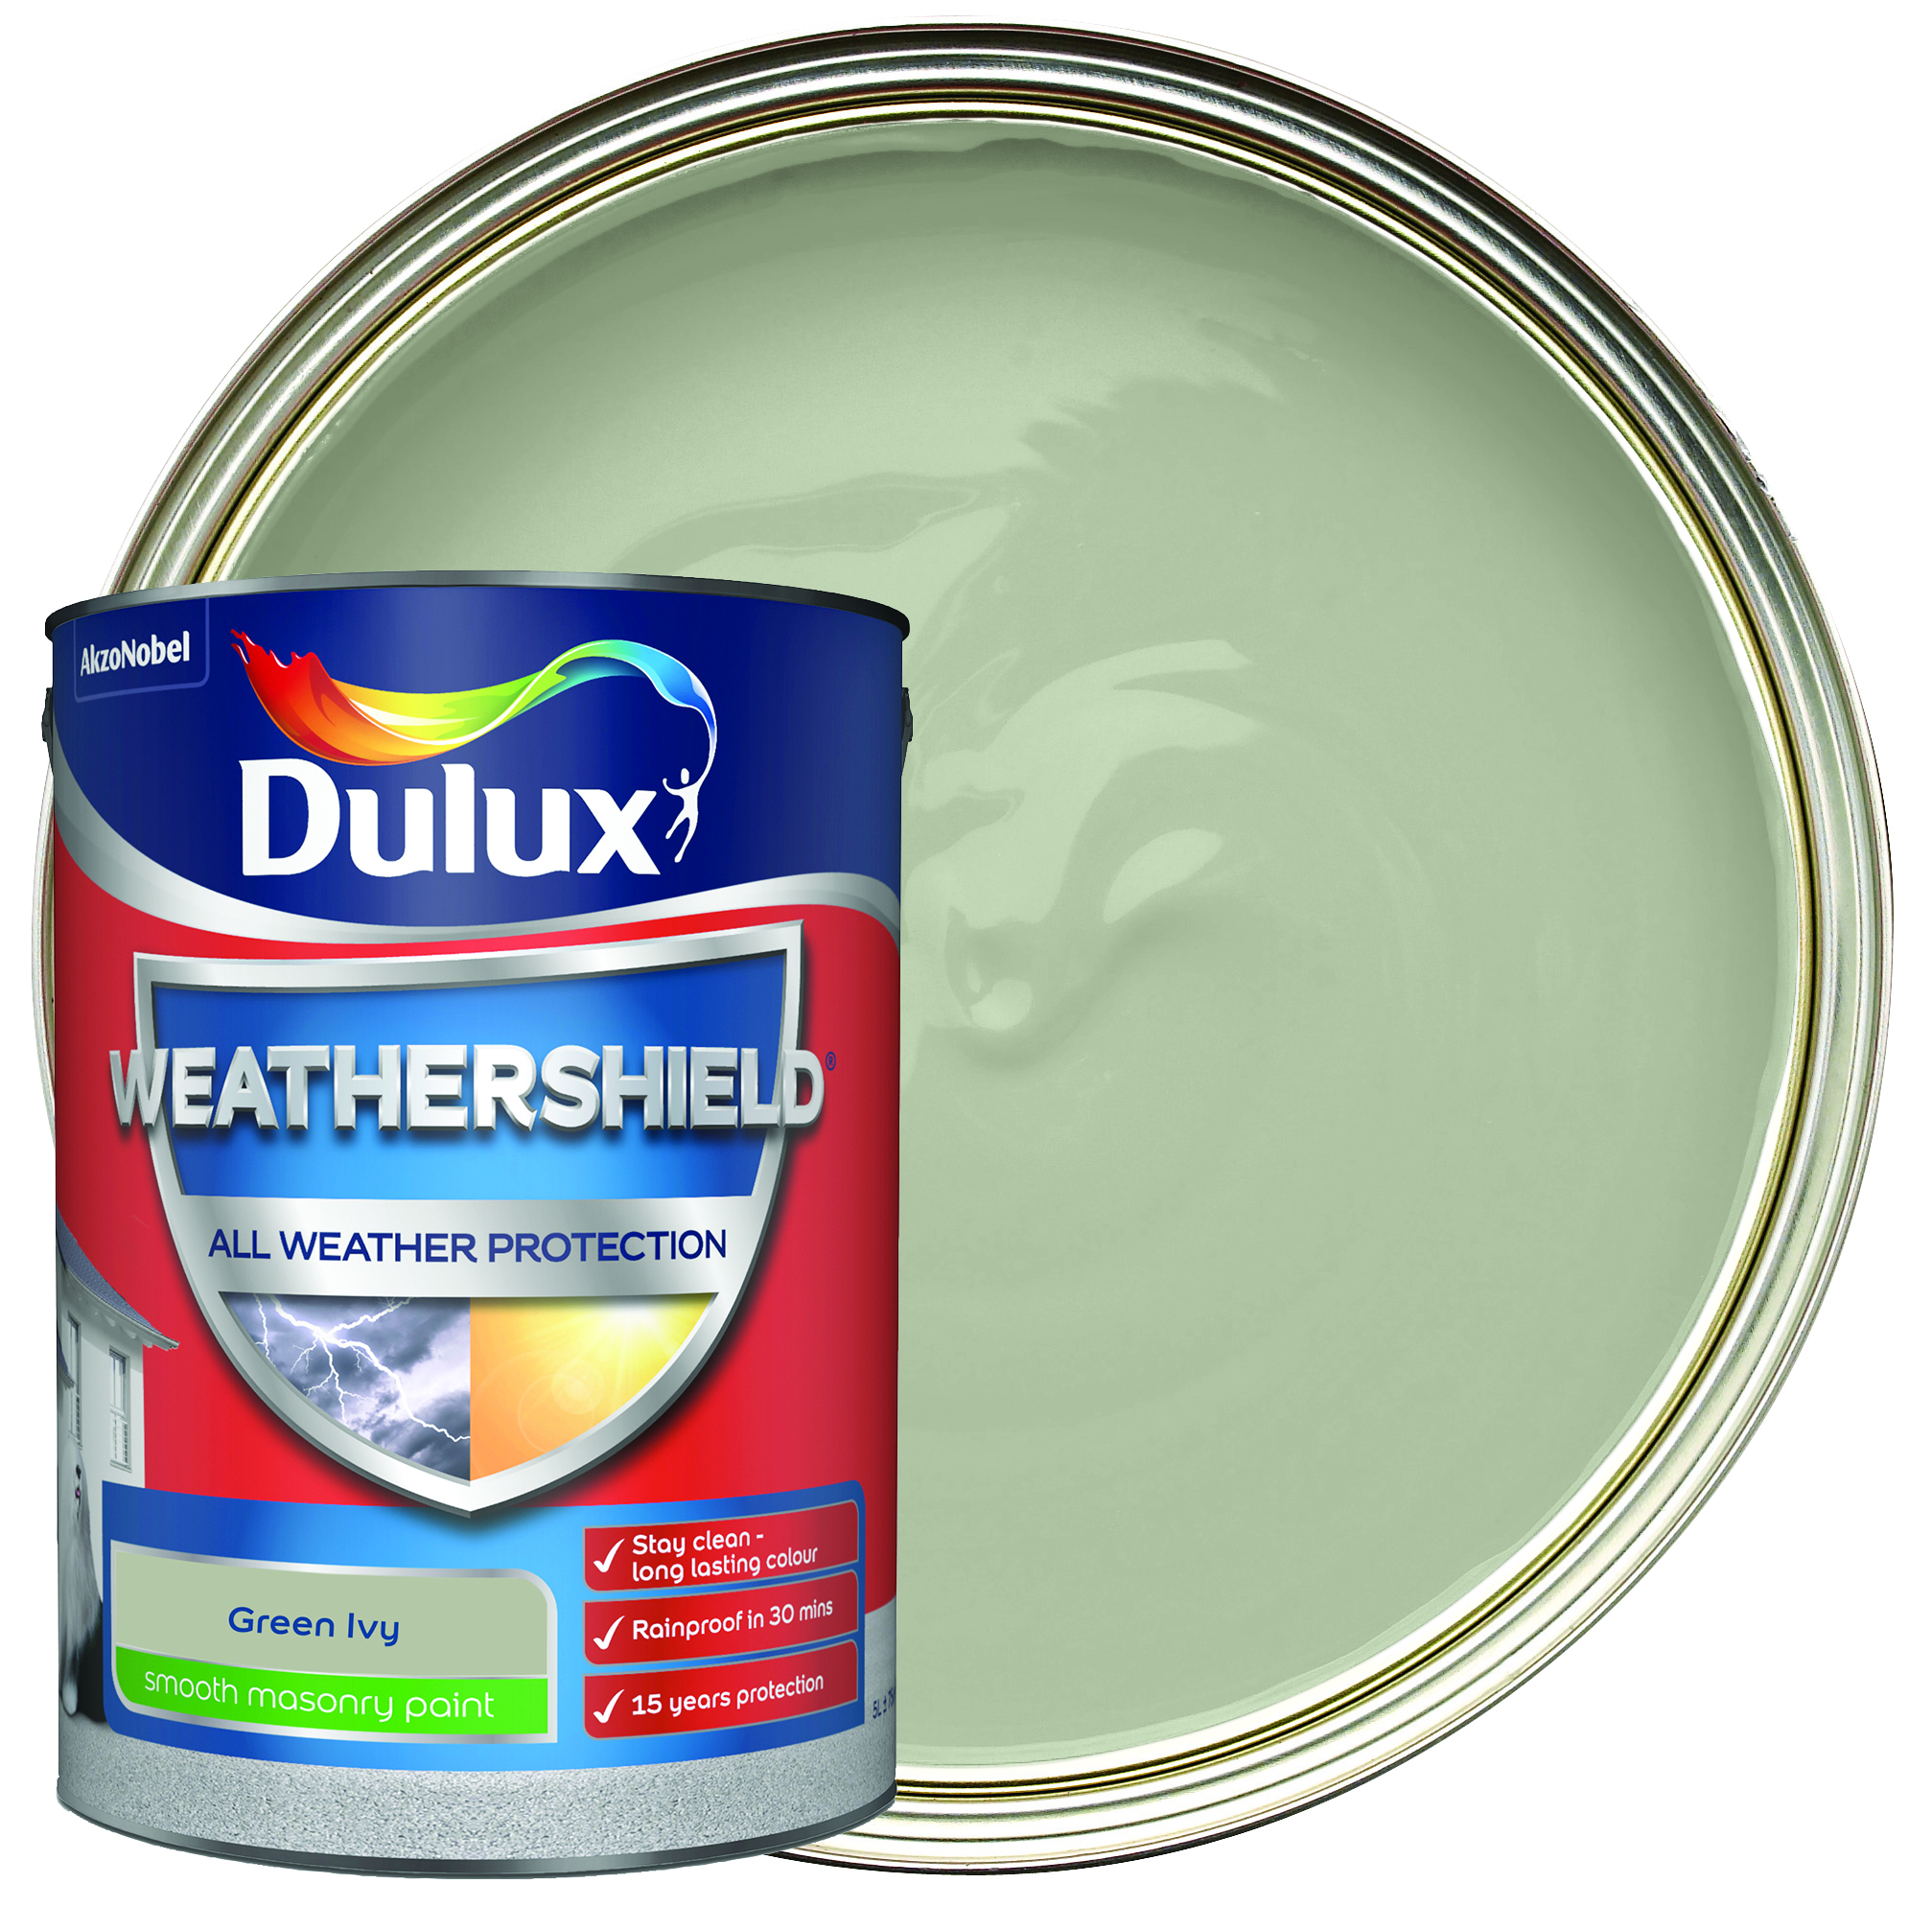 Dulux Weathershield All Weather Purpose Smooth Paint - Green Ivy - 5L